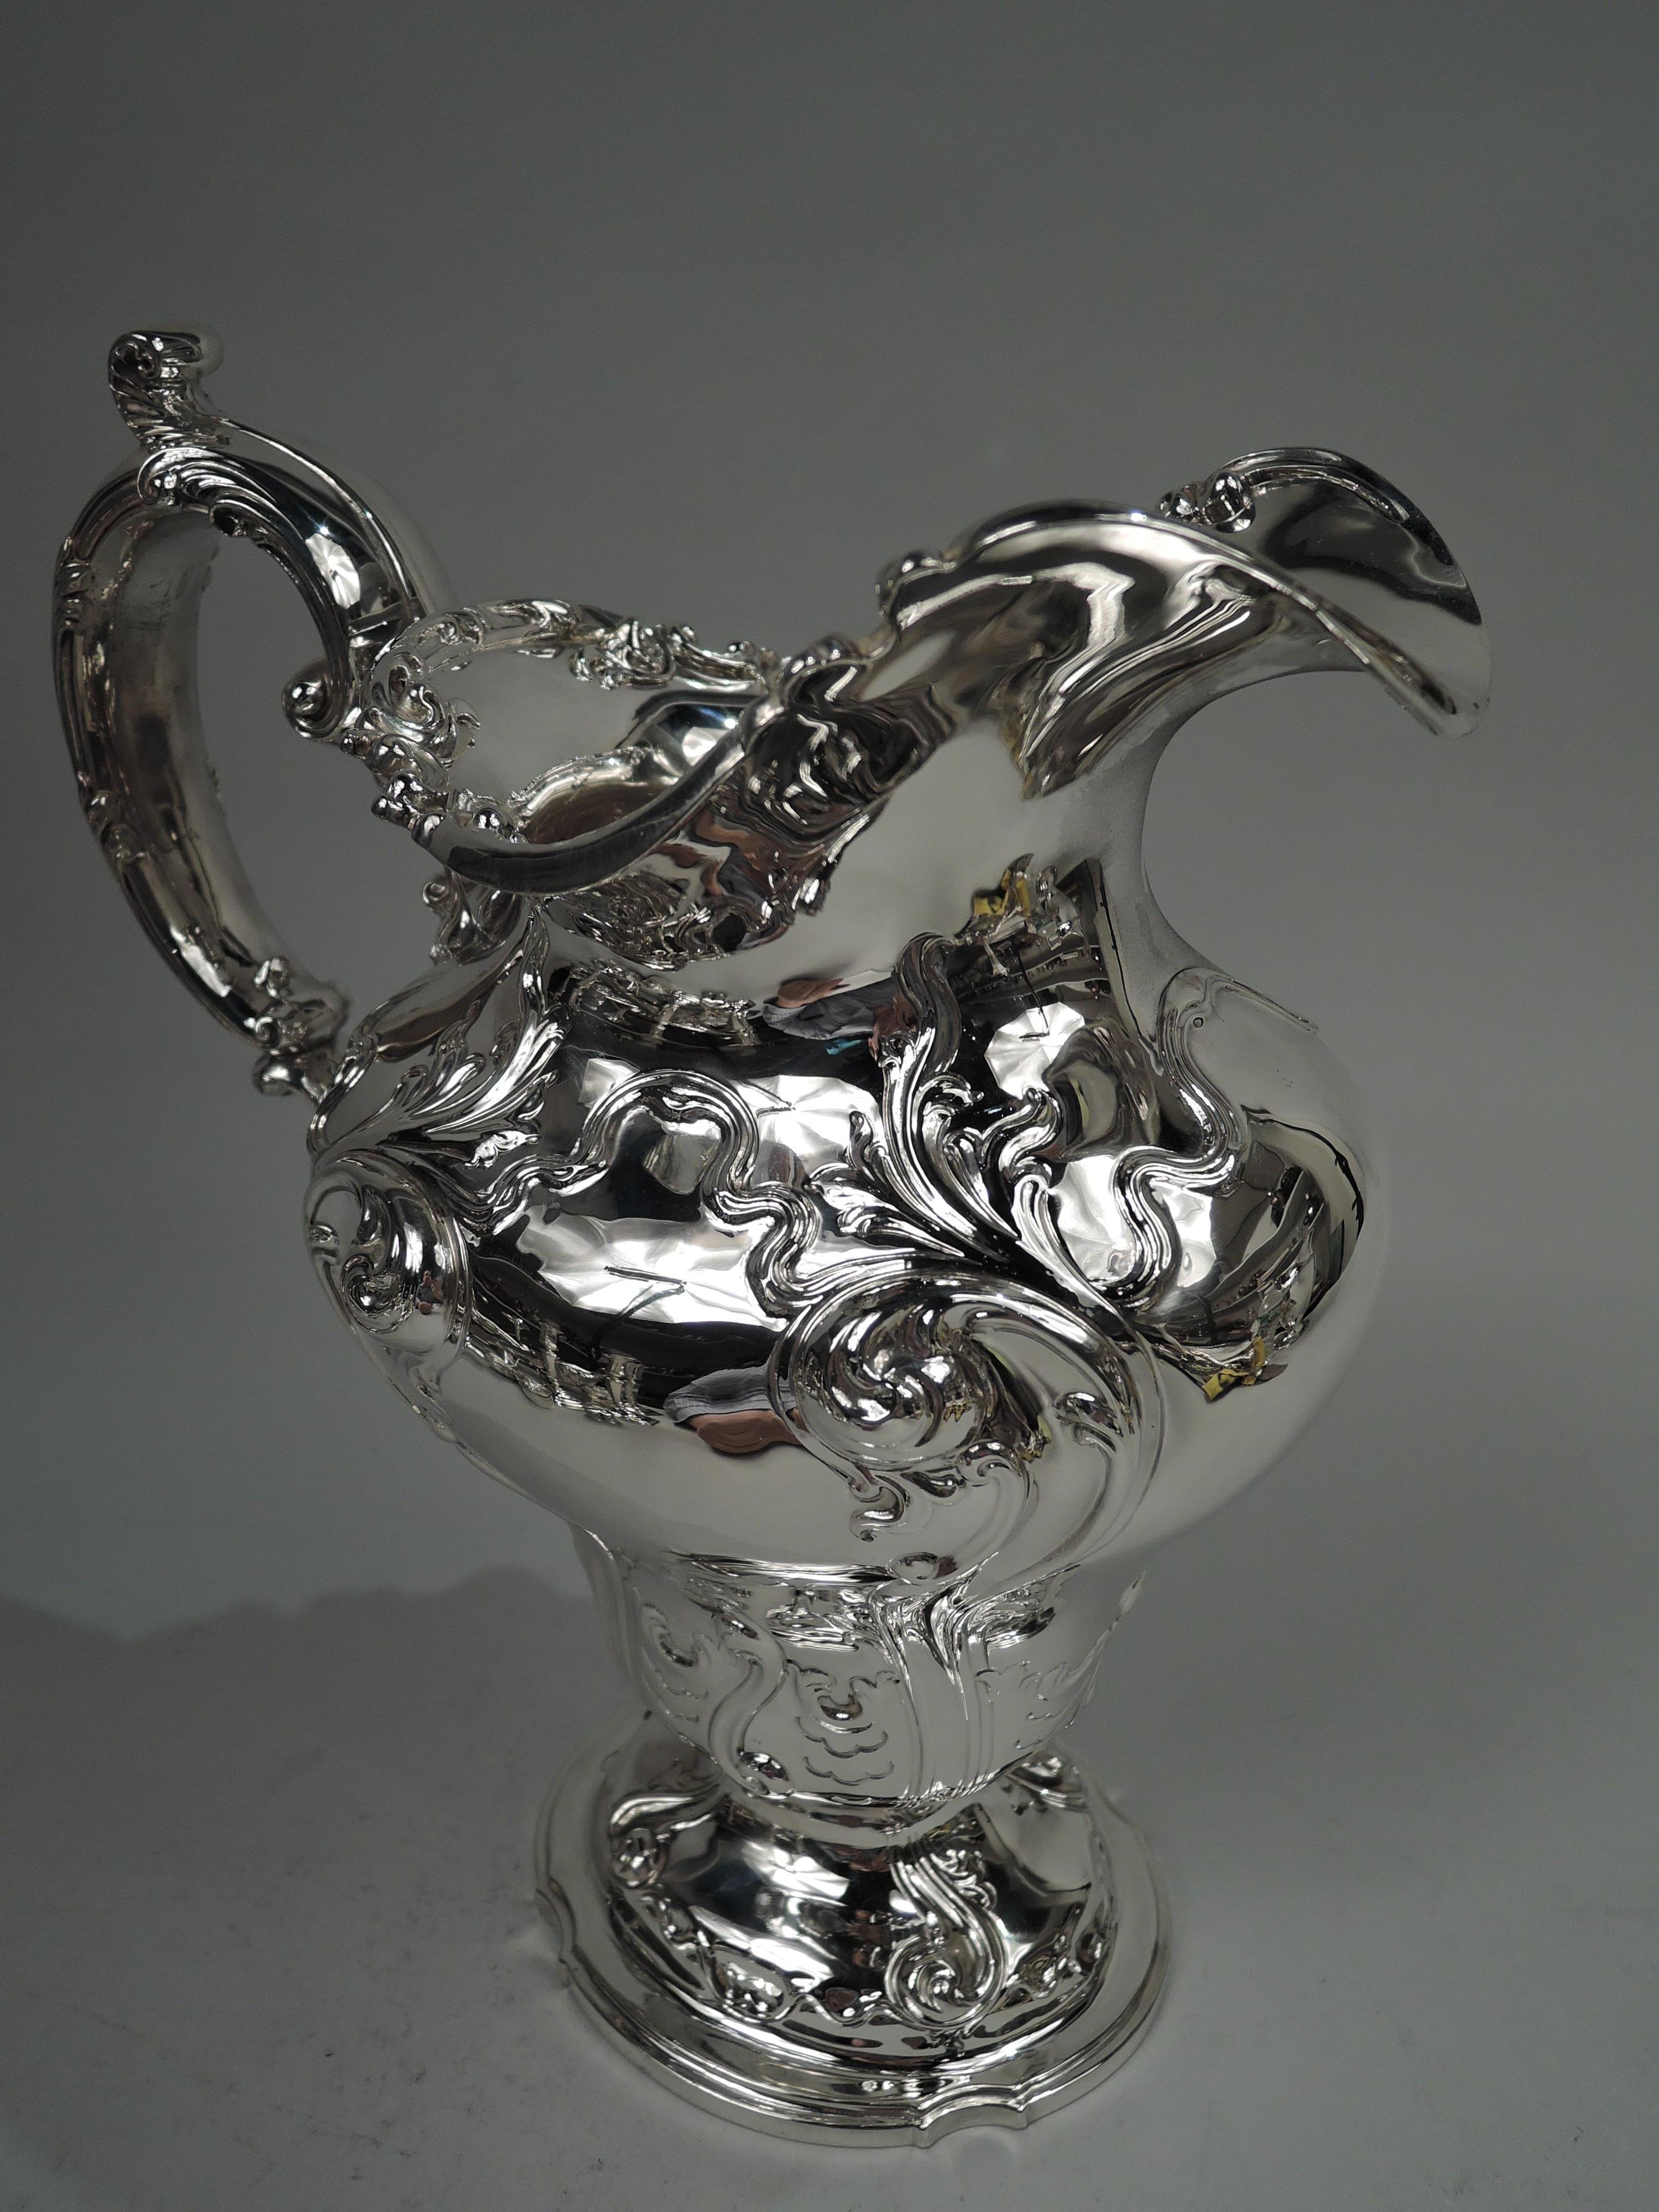 Fancy American Victorian sterling silver water pitcher, ca 1900. Ovoid with baluster bowl on domed foot. Helmet mouth and high-looping leaf-capped double-scroll handle. Chased fluid ornament with leafing scrollwork and tendrils. Rim interior has